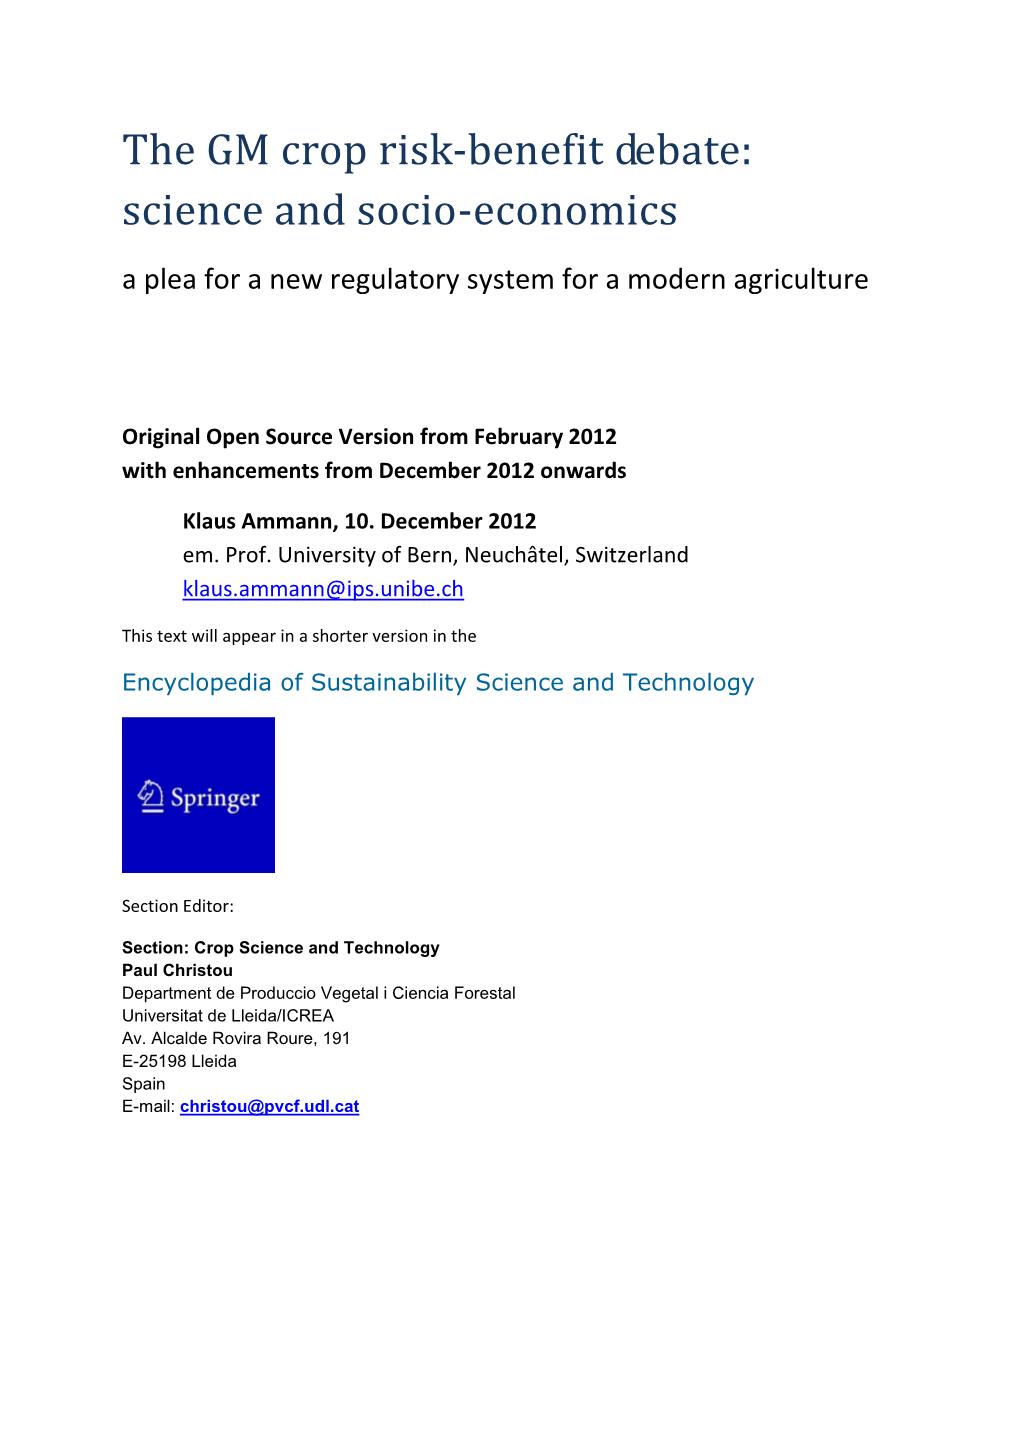 The GM Crop Risk-Benefit Debate: Science and Socio-Economics a Plea for a New Regulatory System for a Modern Agriculture